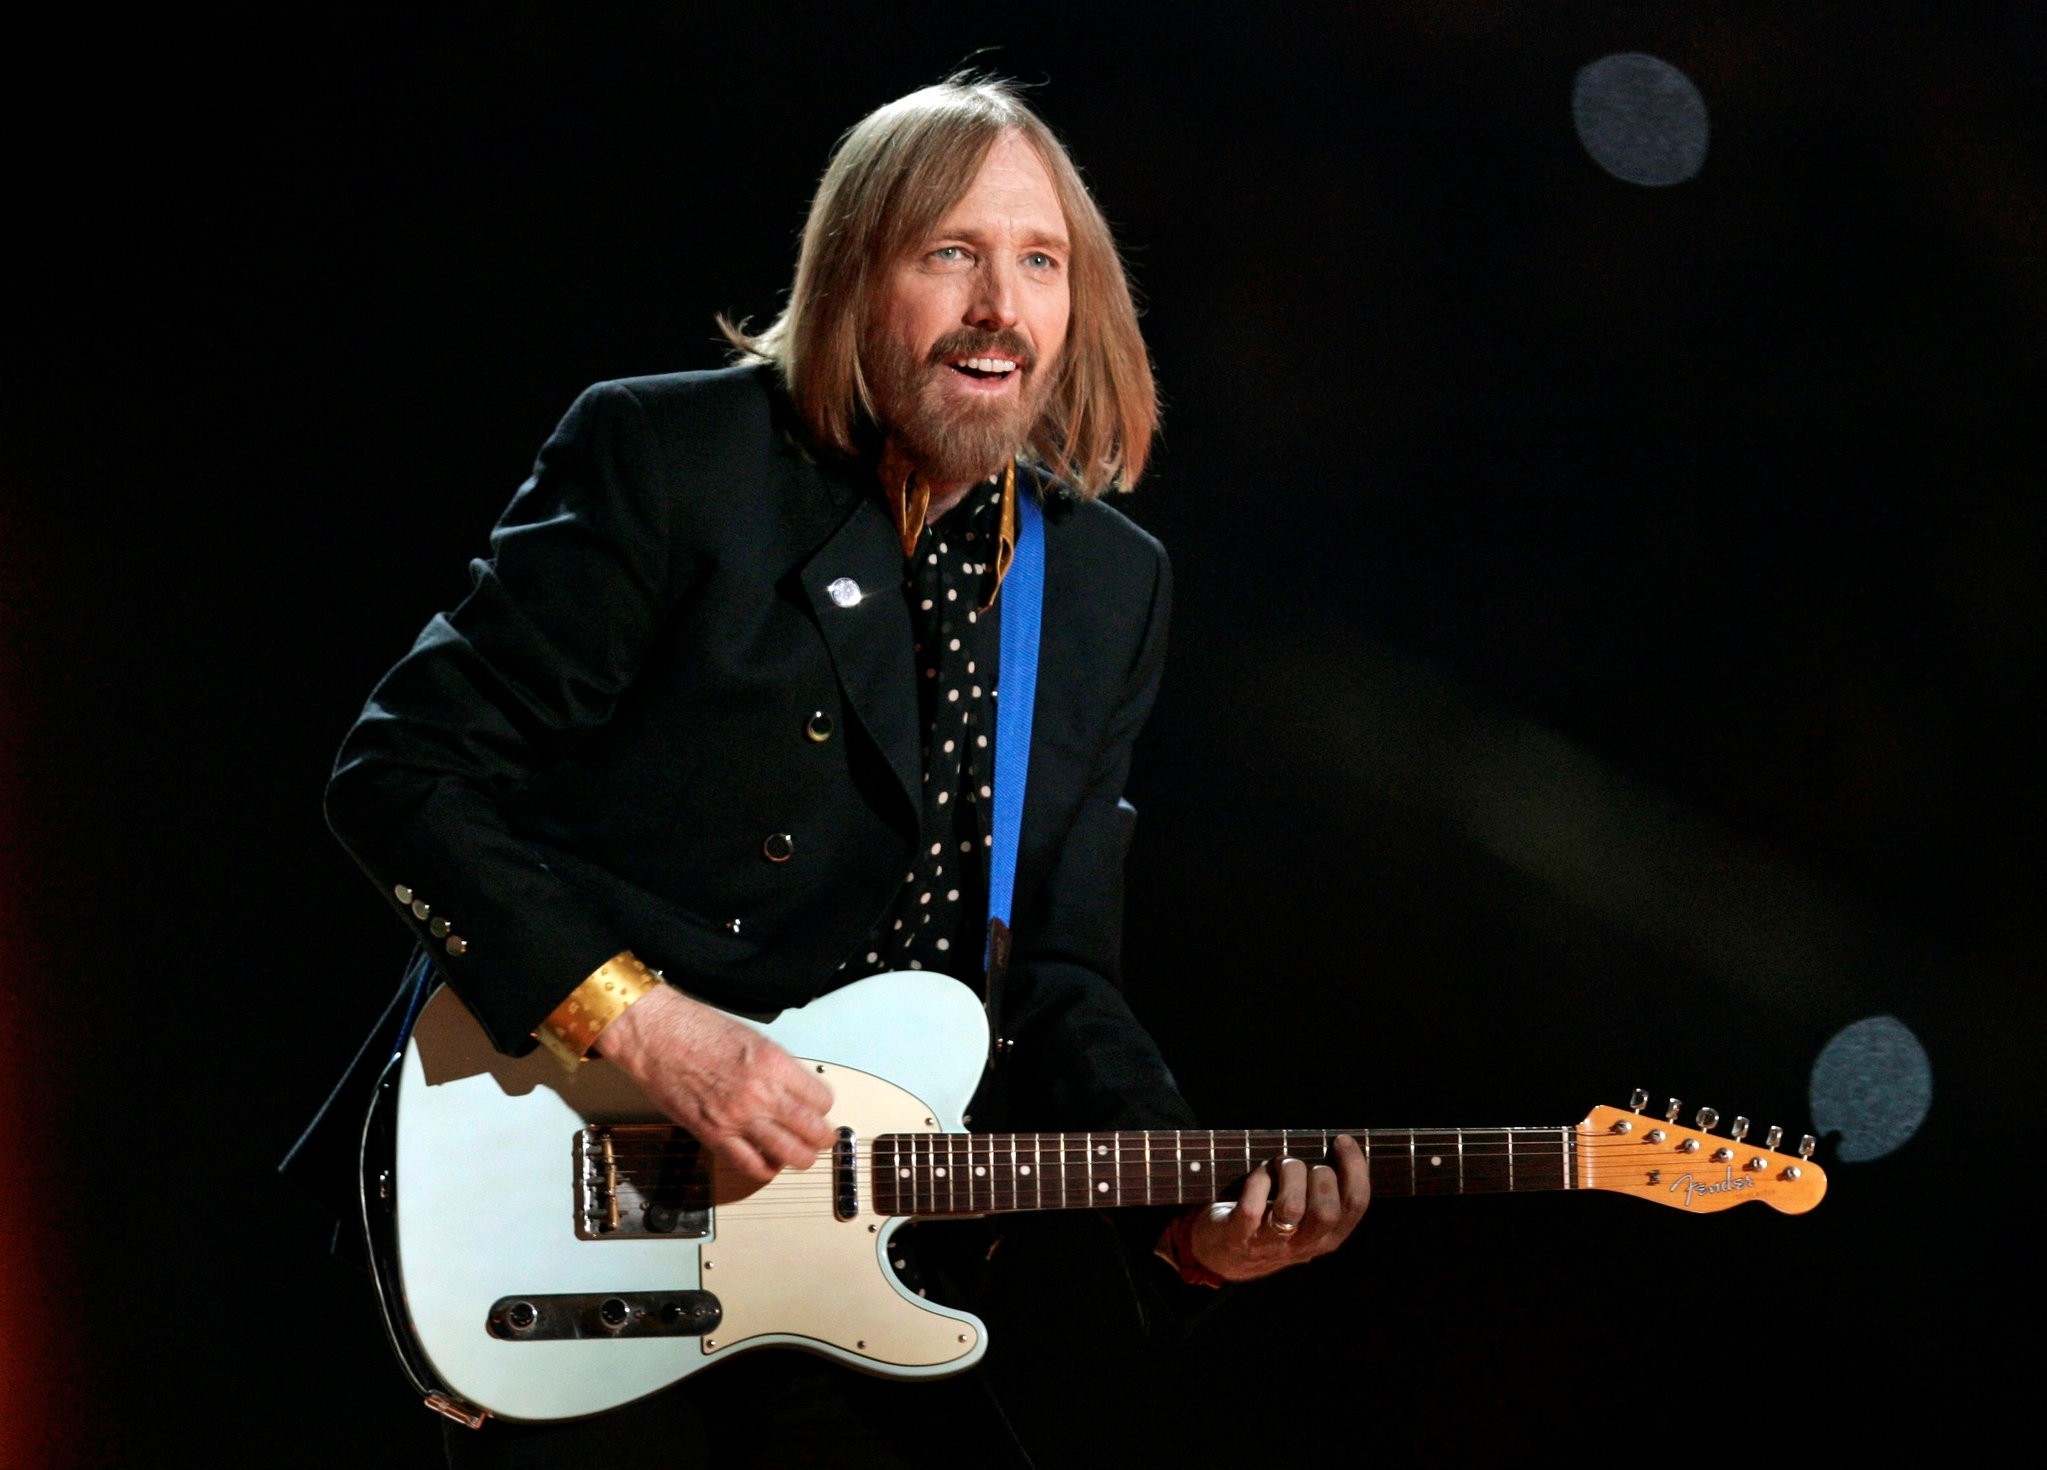 Singer Tom Petty and the Heartbreakers perform during the half time show of the NFL's Super Bowl XLII football game between the New England Patriots and the New York Giants in Glendale, Arizona, February 3, 2008. (REUTERS Photo)